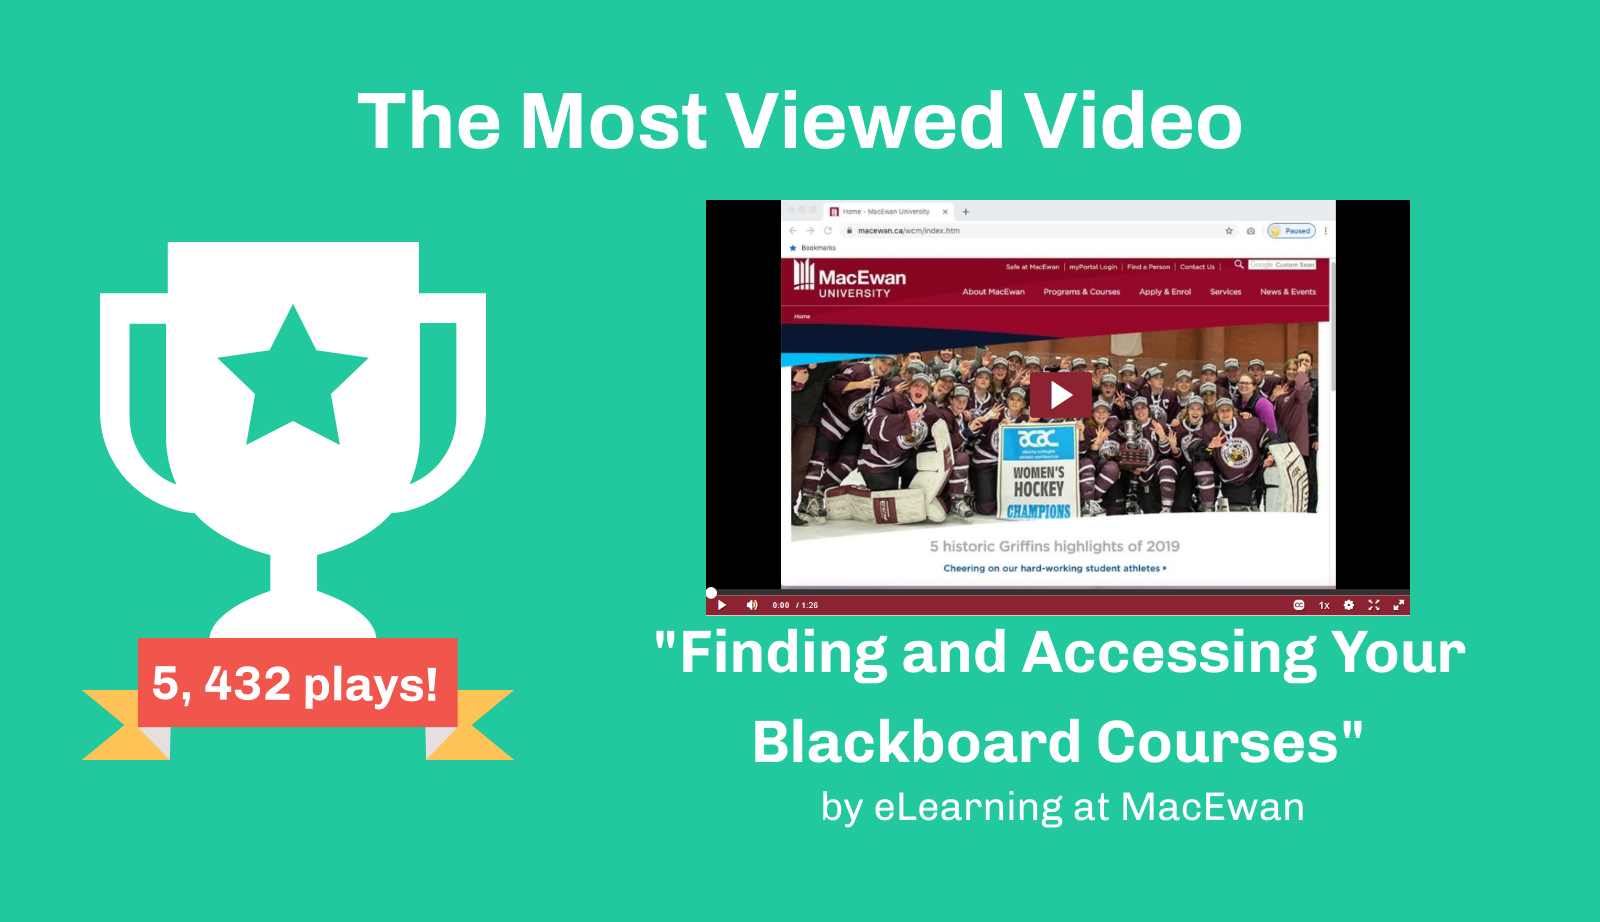 The most viewed video: "Finding and Accessing Your Blackboard Courses" by eLearning at MacEwan. 5,432 plays!